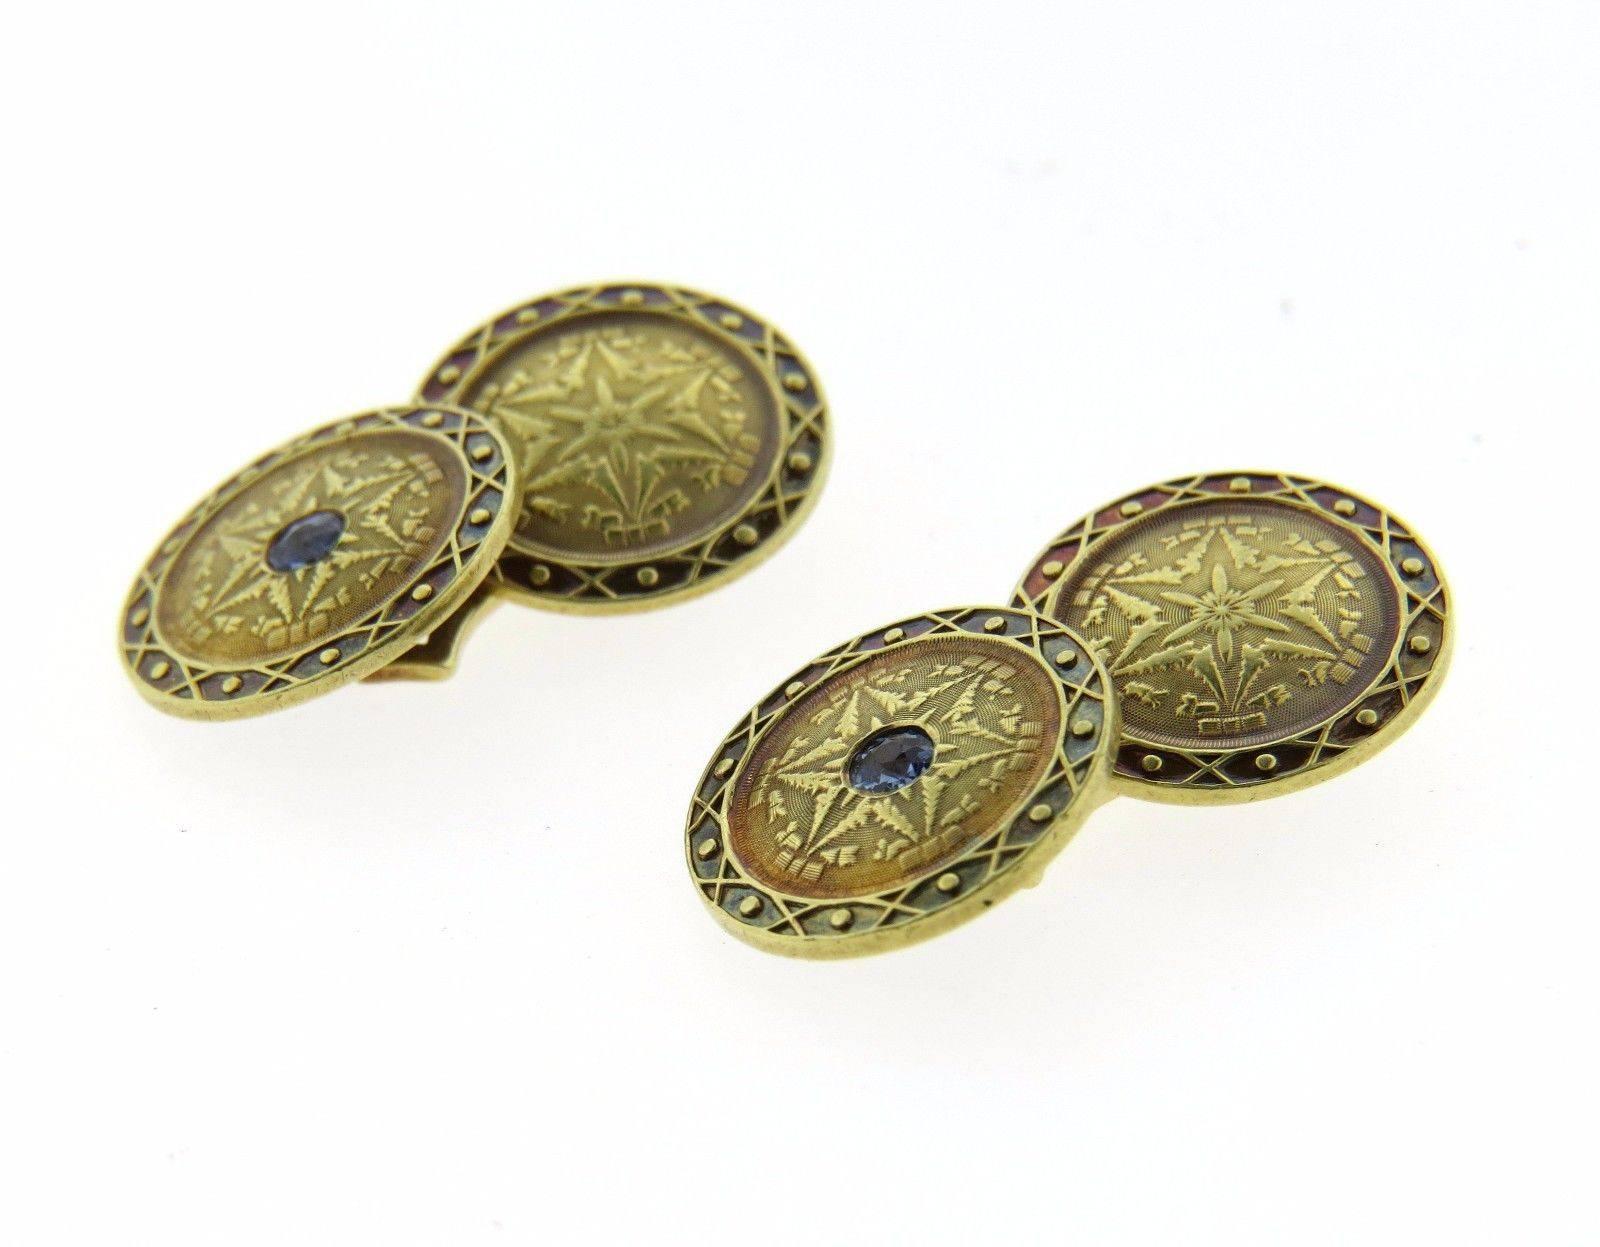 A pair 14k yellow gold cufflinks set with sapphires, measuring 15mm in diameter and weighing 9.3 grams.